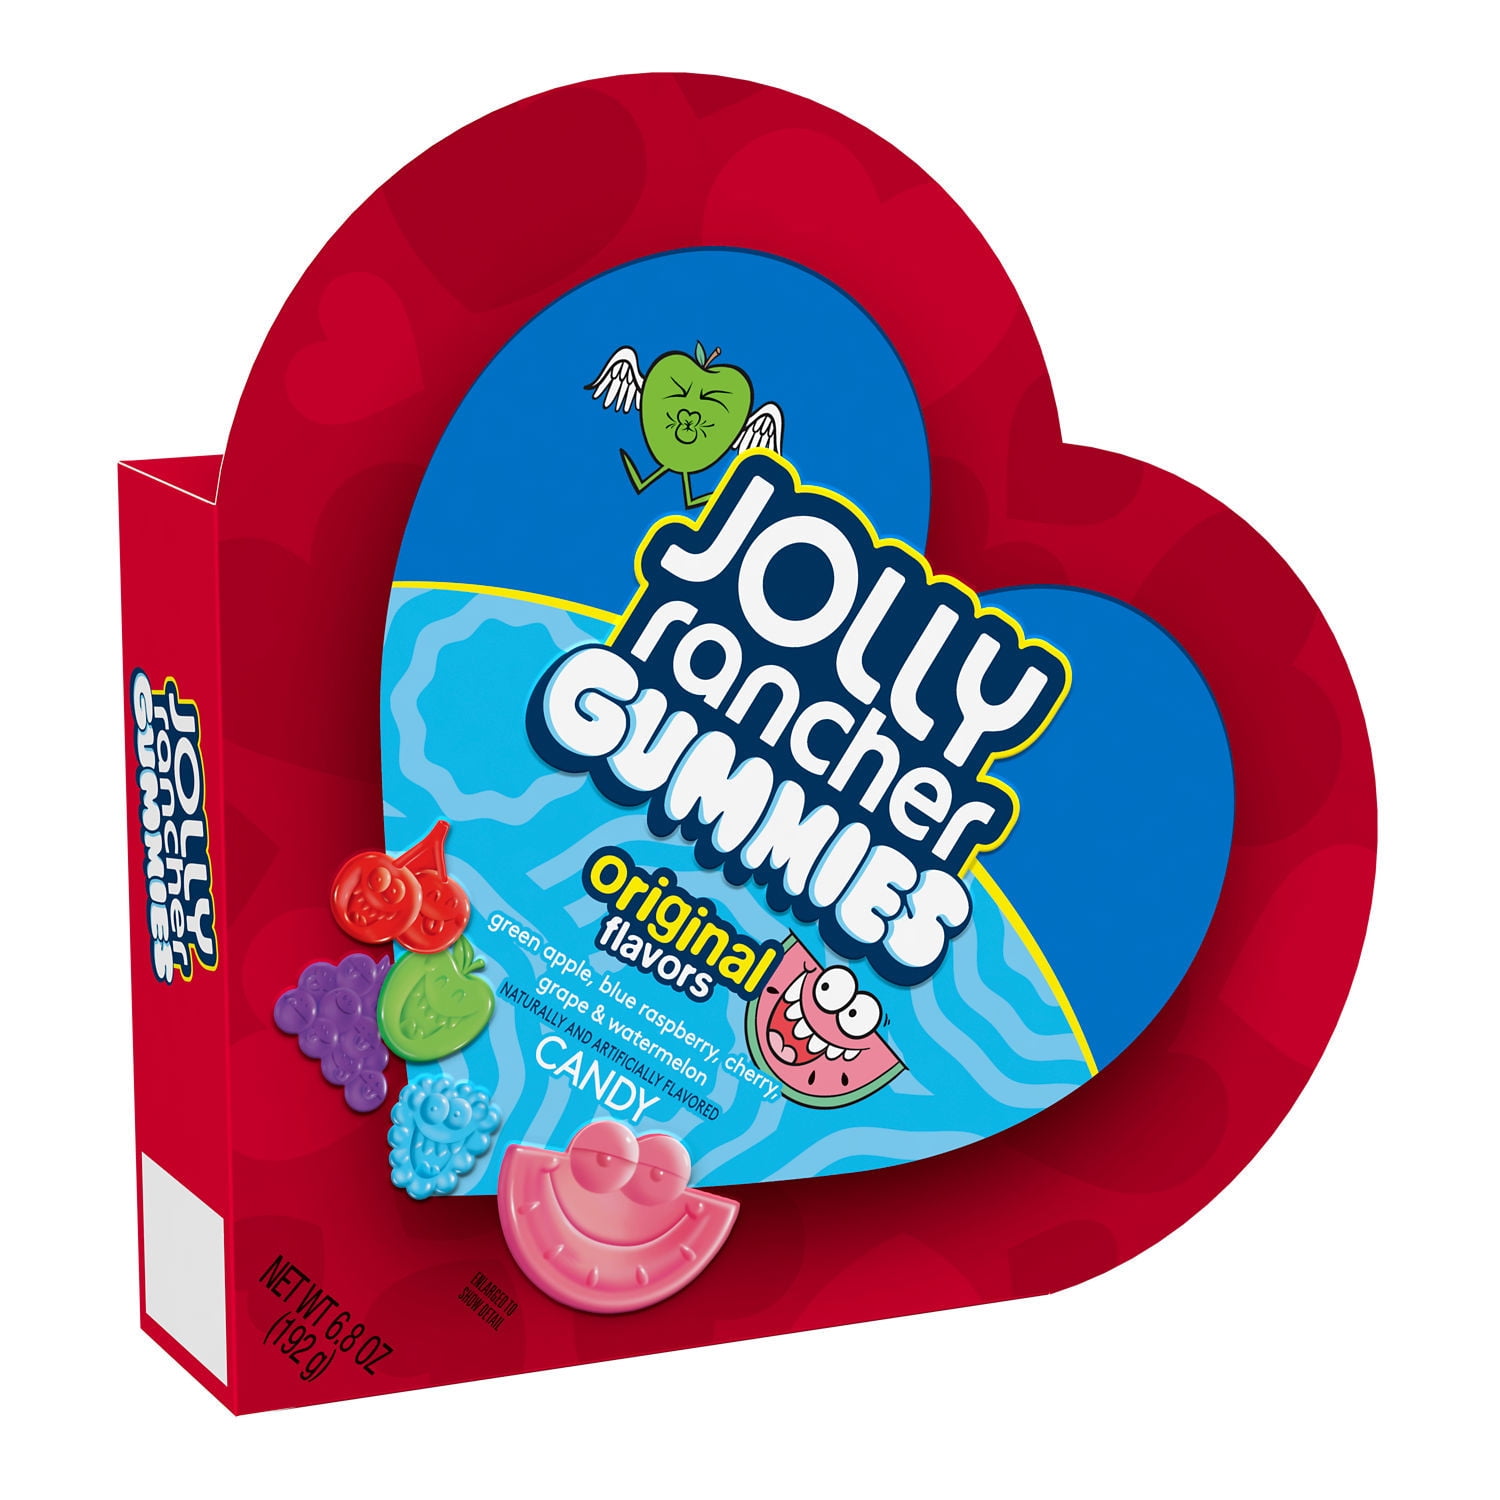 JOLLY RANCHER, Assorted Fruit Flavored Gummies Candy, Valentine's Day Gift, 6.8 oz, Heart Box